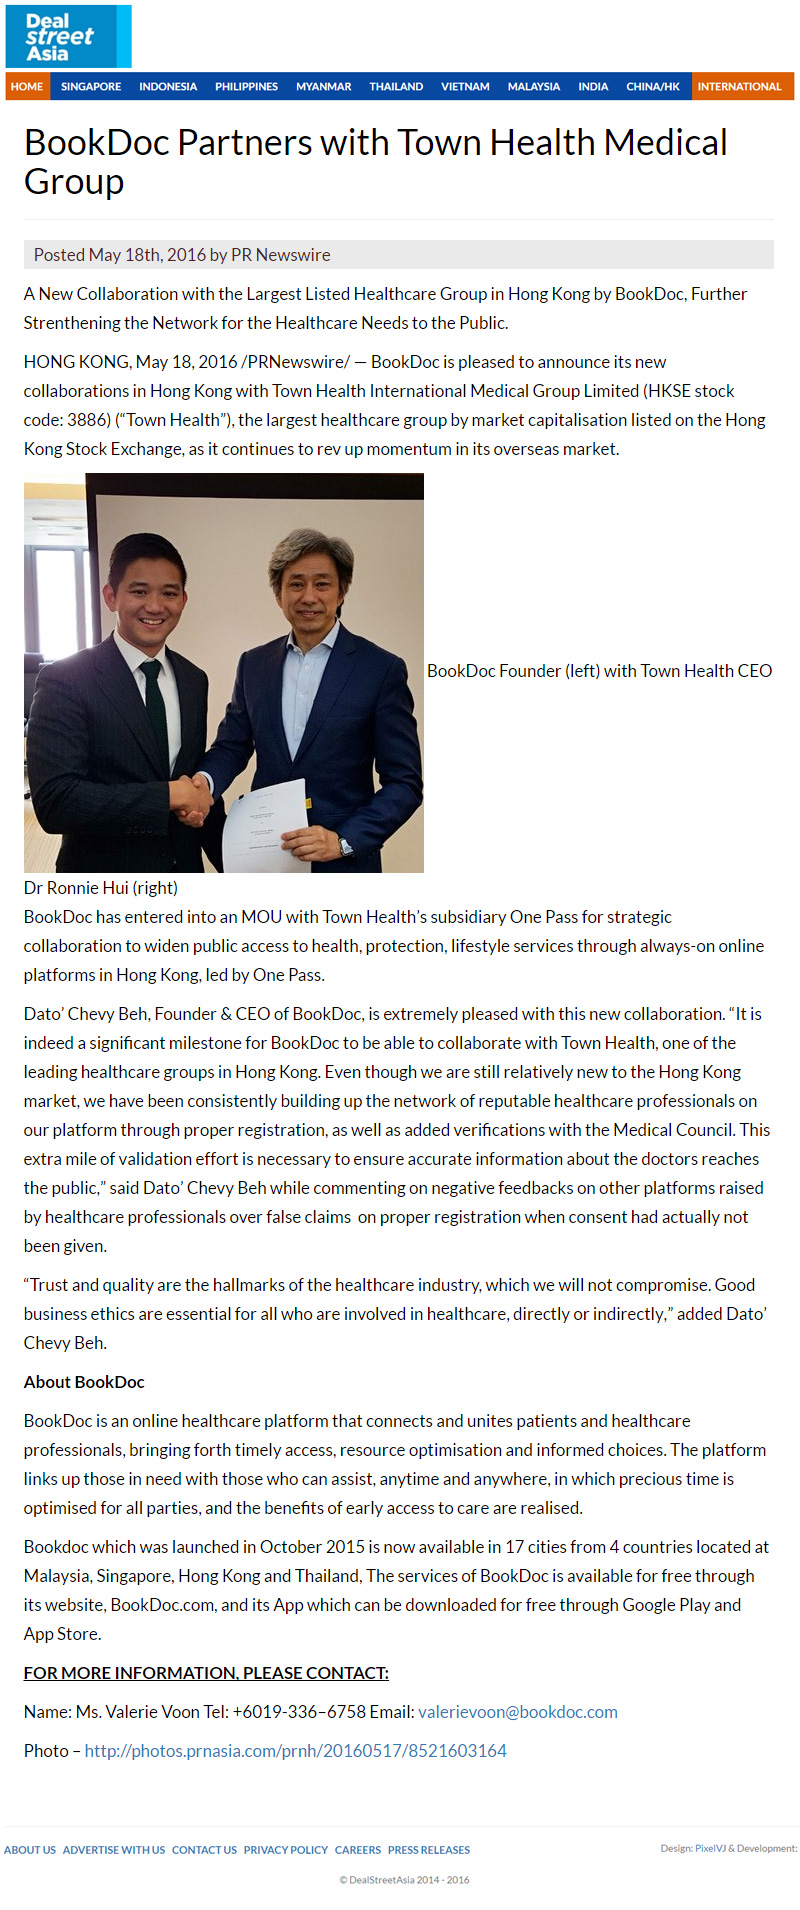 BookDoc Partners with Town Health Medical Group